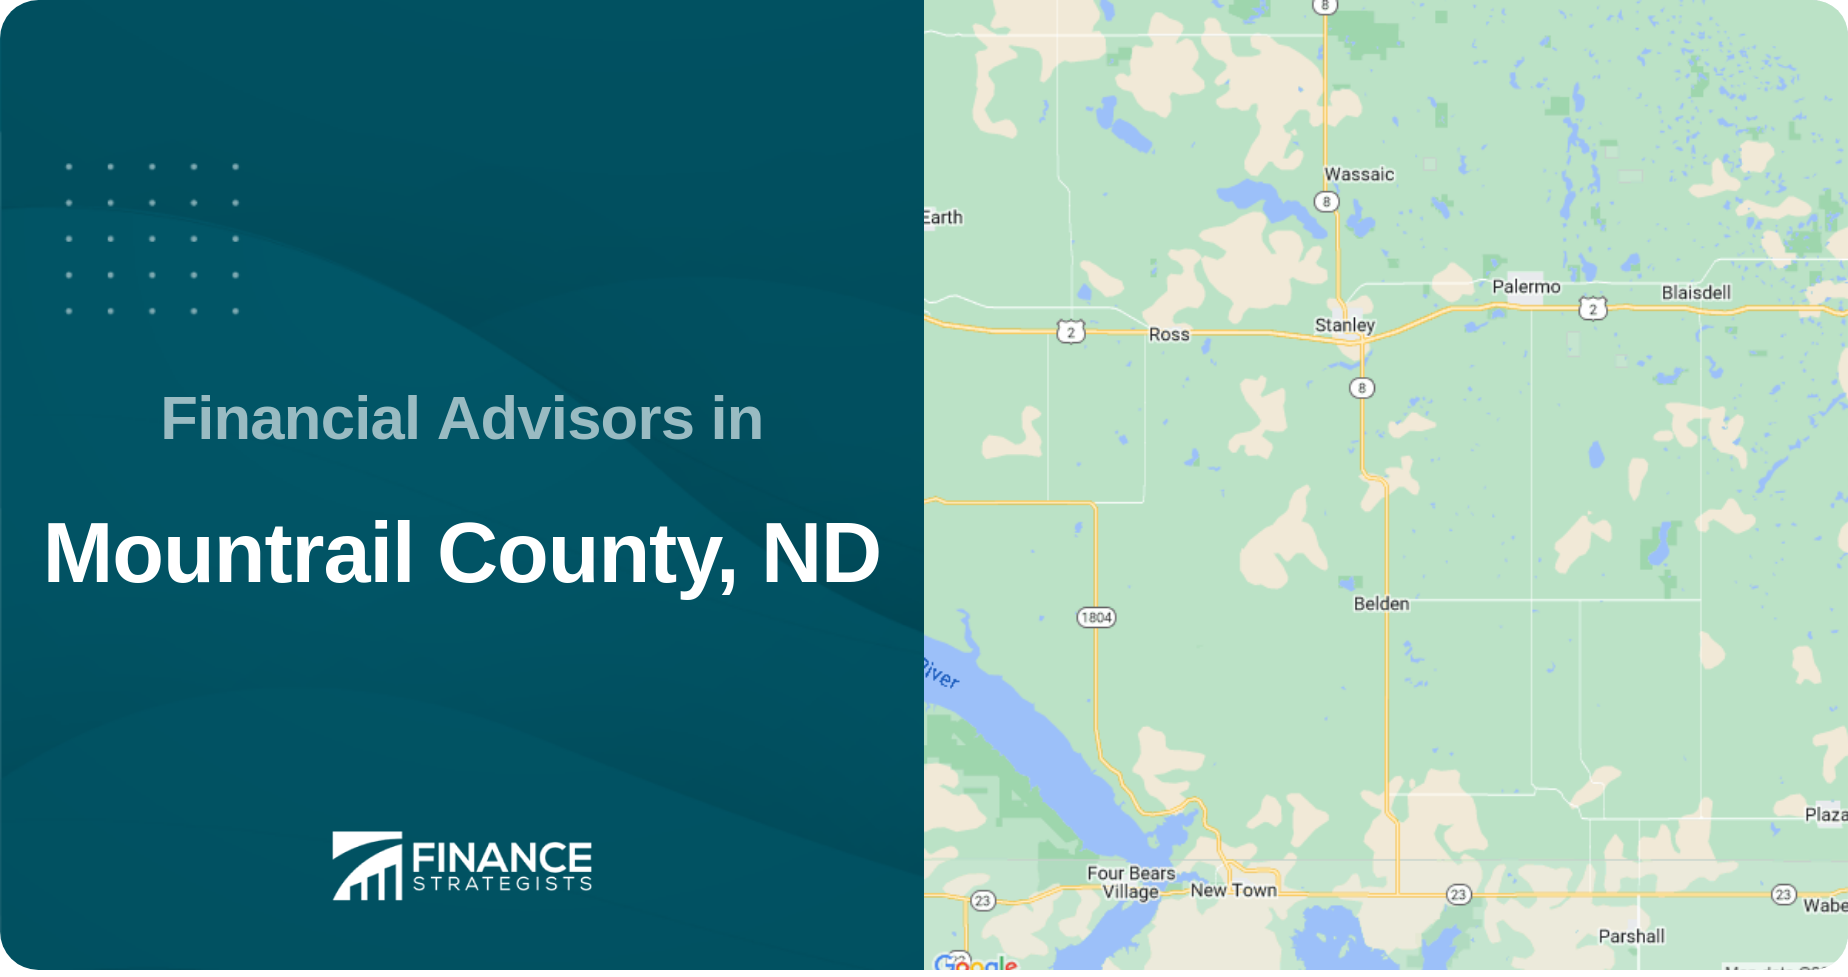 Financial Advisors in Mountrail County, ND